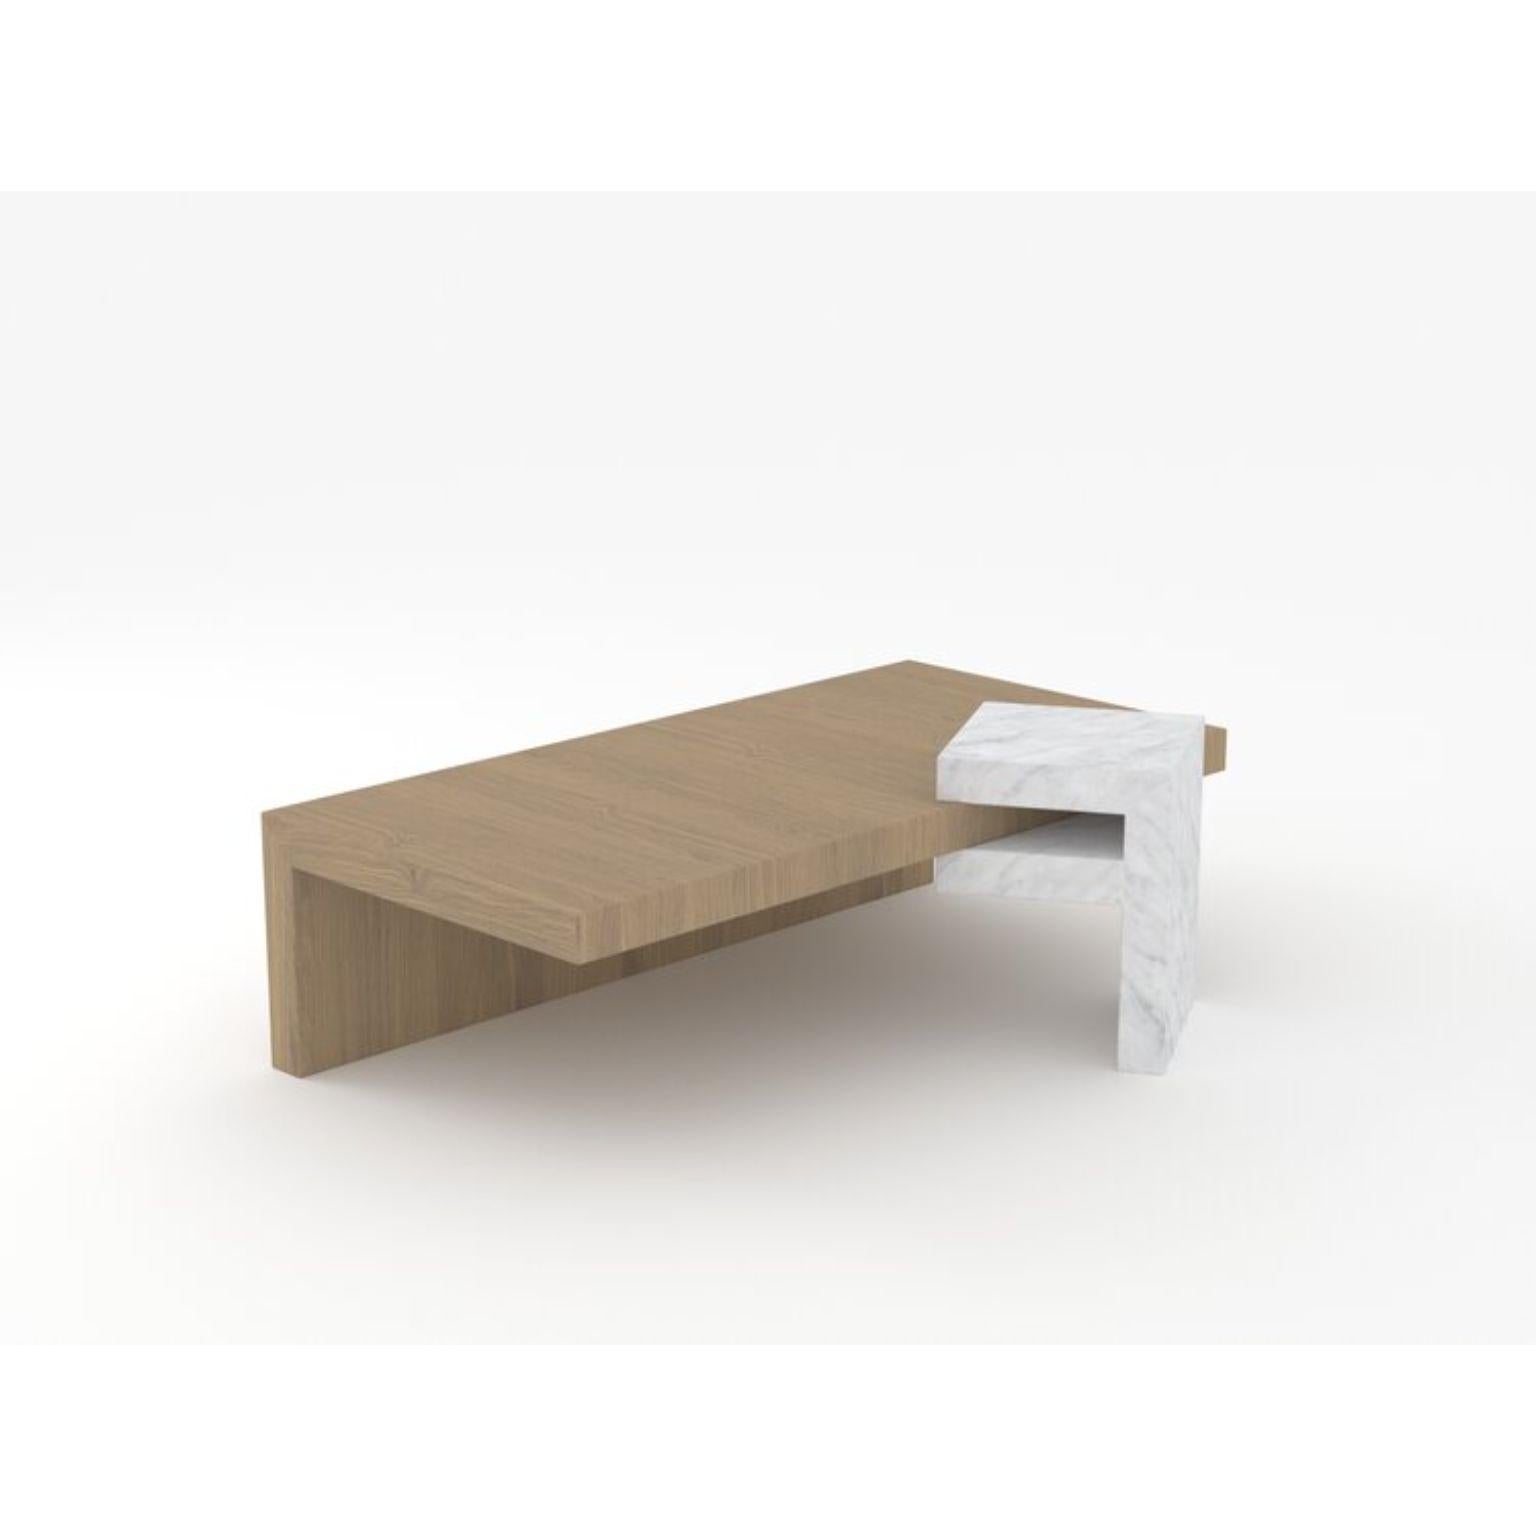 Yume oak + white carrara table by Joyful Homes
Materials:solid European oak - oiled finish and white carrara.
Dimensions: L120 x W60/78 x H34/40 cm. 
Also available in different sizes and materials. 

Composed of two parts that uniquely connect